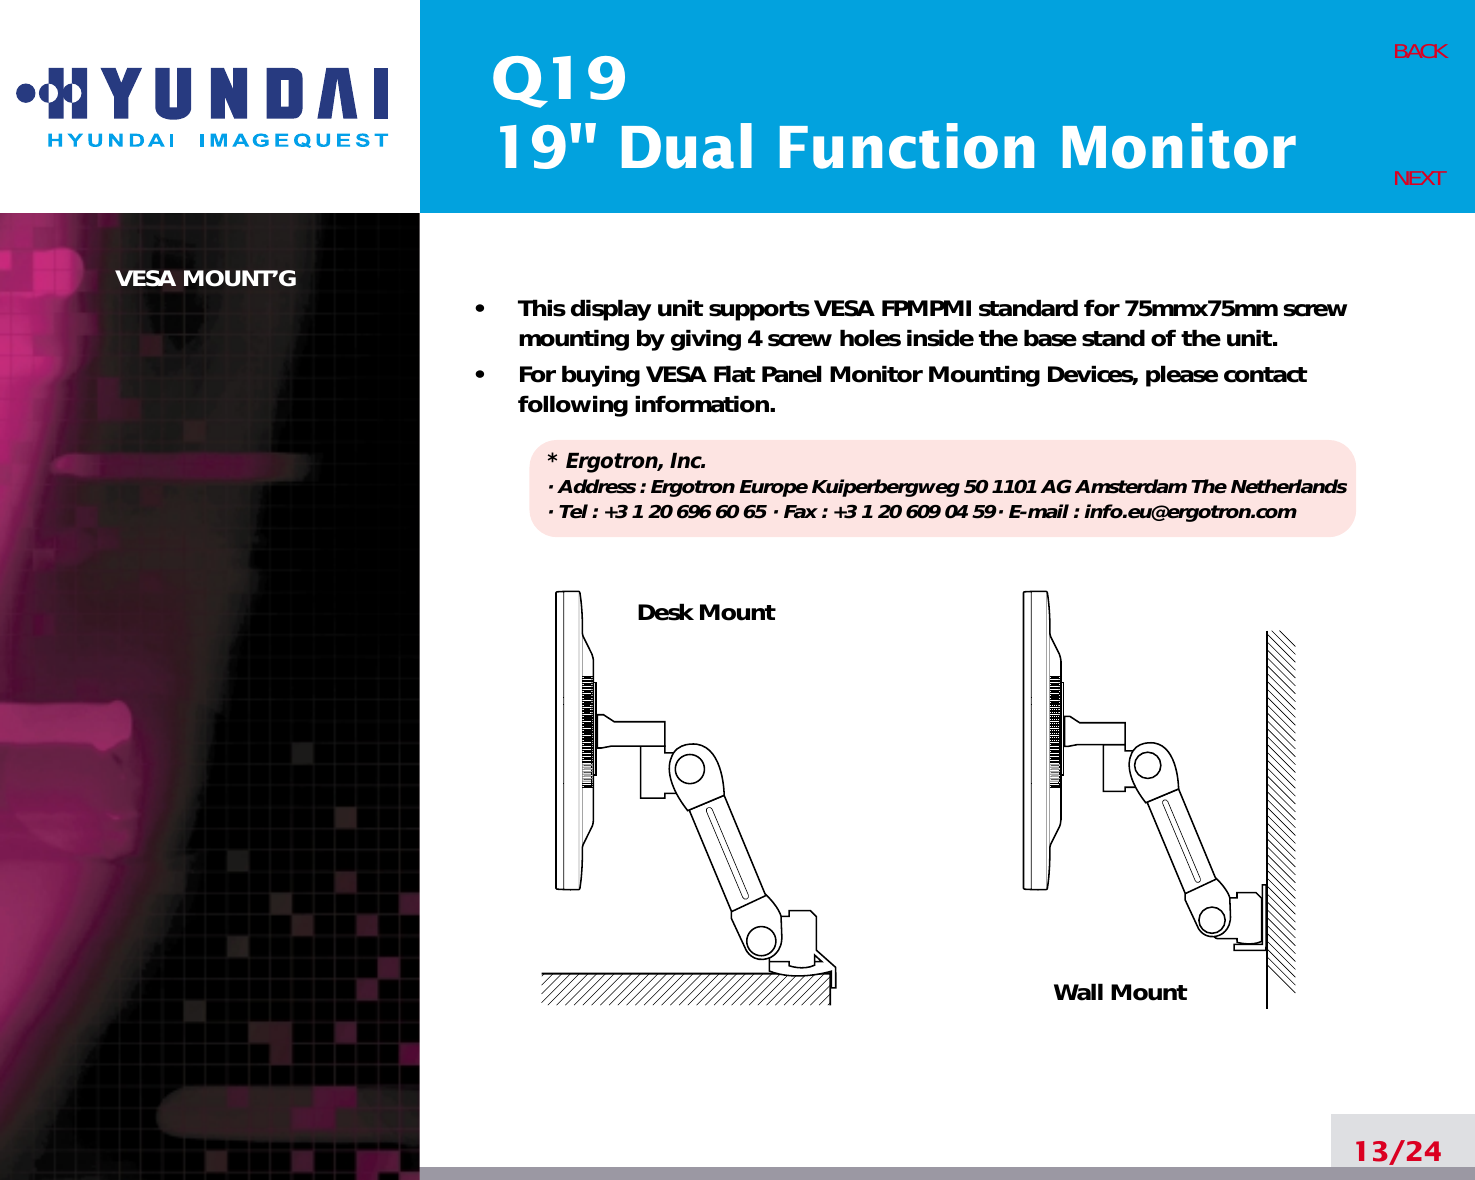 Q1919&quot; Dual Function MonitorVESA MOUNT’G•     This display unit supports VESA FPMPMI standard for 75mmx75mm screwmounting by giving 4 screw holes inside the base stand of the unit.•     For buying VESA Flat Panel Monitor Mounting Devices, please contactfollowing information.* Ergotron, Inc.· Address : Ergotron Europe Kuiperbergweg 50 1101 AG Amsterdam The Netherlands· Tel : +3 1 20 696 60 65 · Fax : +3 1 20 609 04 59· E-mail : info.eu@ergotron.com13/24BACKNEXTDesk MountWall Mount